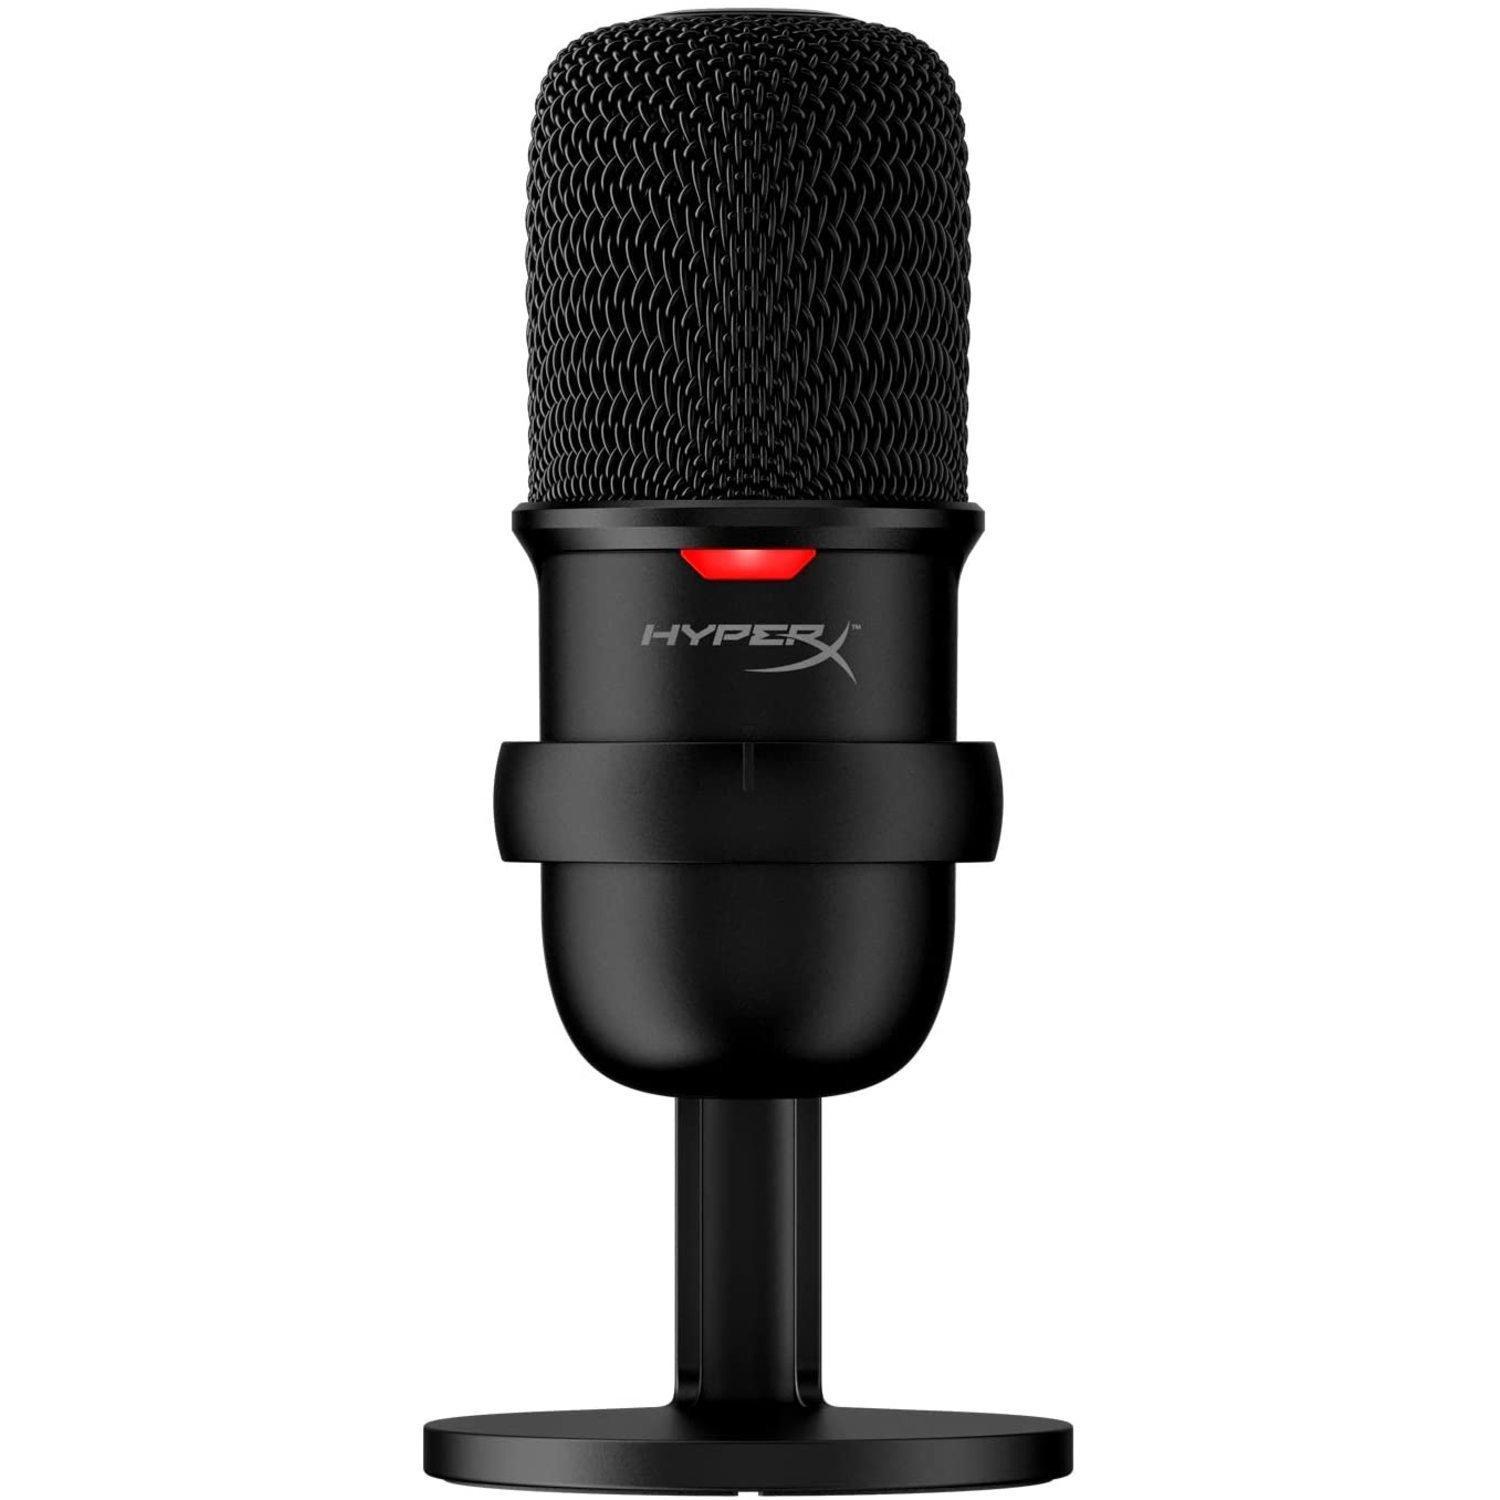 HyperX SoloCast USB Microphone for $34.99 Shipped